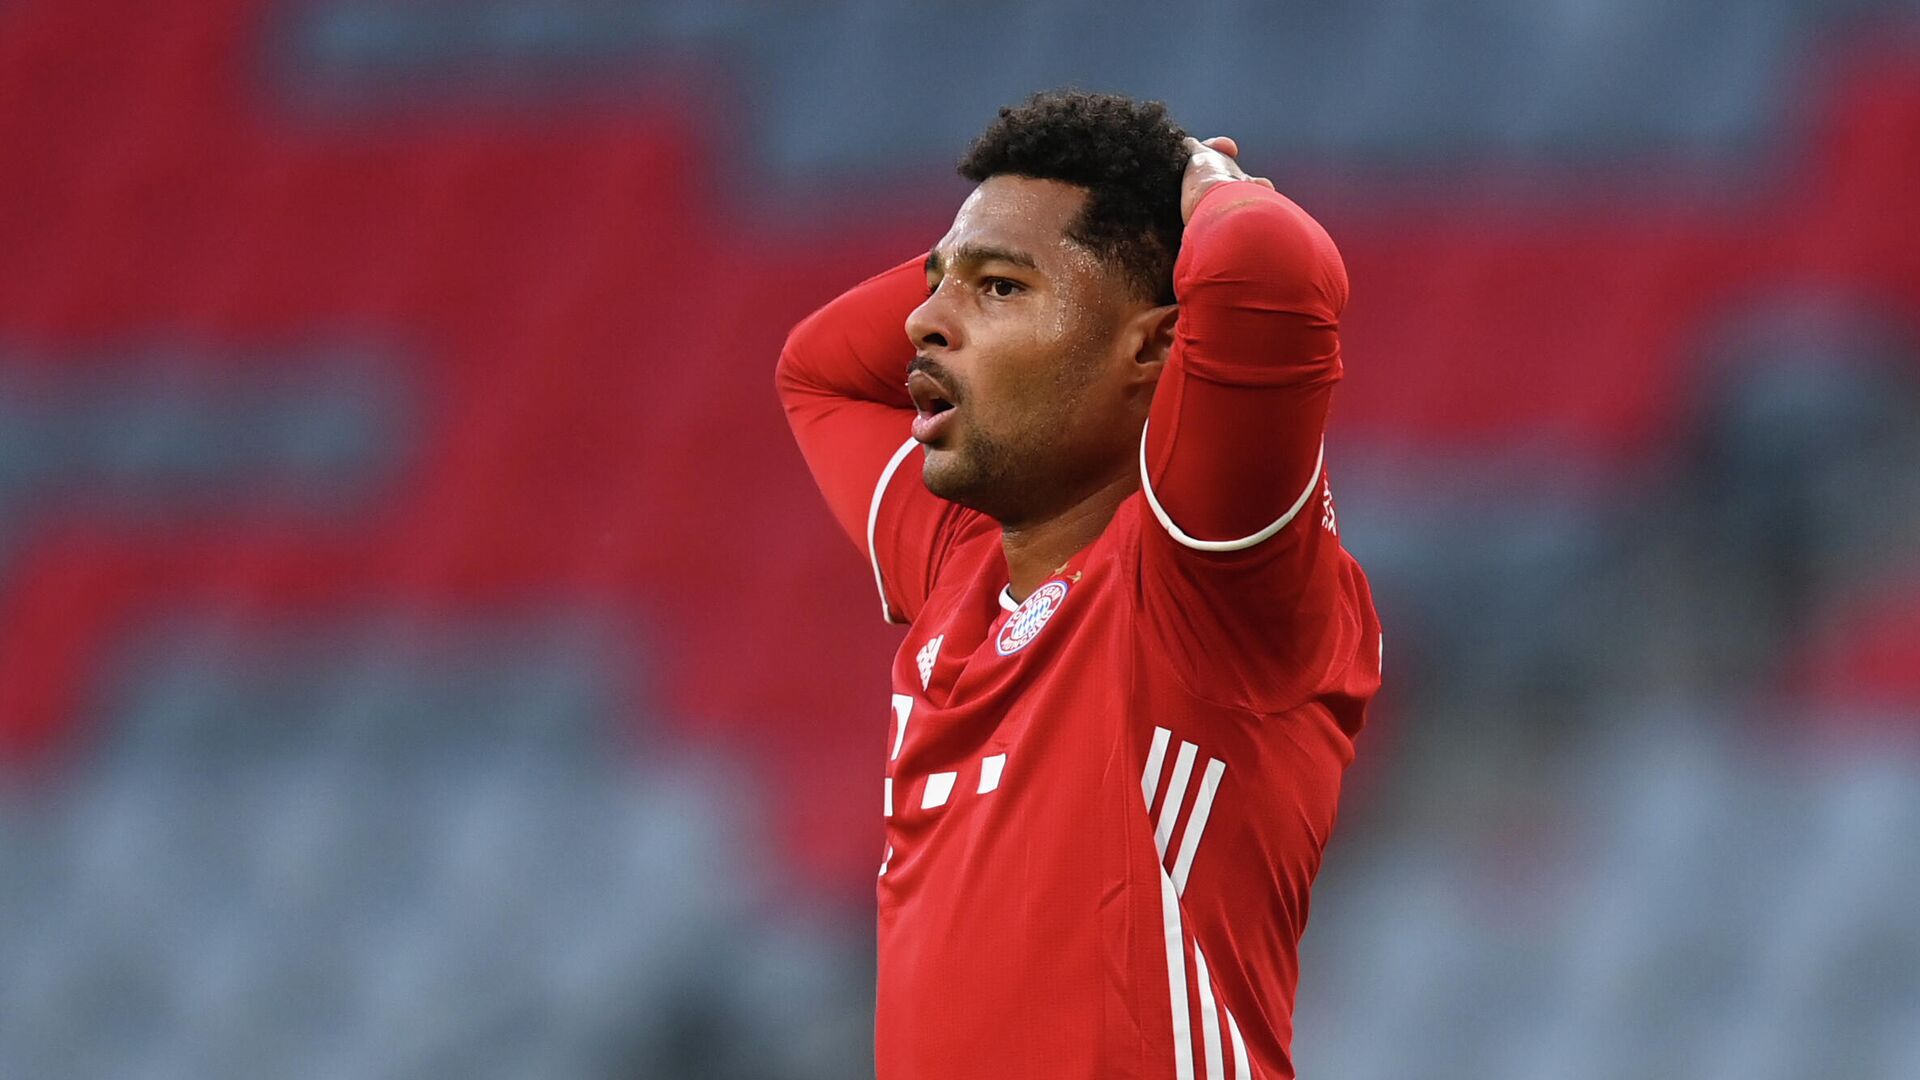 (FILES) In this file photo taken on October 4, 2020 Bayern Munich's German midfielder Serge Gnabry reacts during the German first division Bundesliga football match FC Bayern Munich vs Hertha Berlin in Munich, southern Germany. - Bayern Munich's German midfielder Serge Gnabry has tested positiv for Covid-19 the club reported on October 20, 2020. (Photo by CHRISTOF STACHE / AFP) / DFL REGULATIONS PROHIBIT ANY USE OF PHOTOGRAPHS AS IMAGE SEQUENCES AND/OR QUASI-VIDEO - РИА Новости, 1920, 25.10.2020